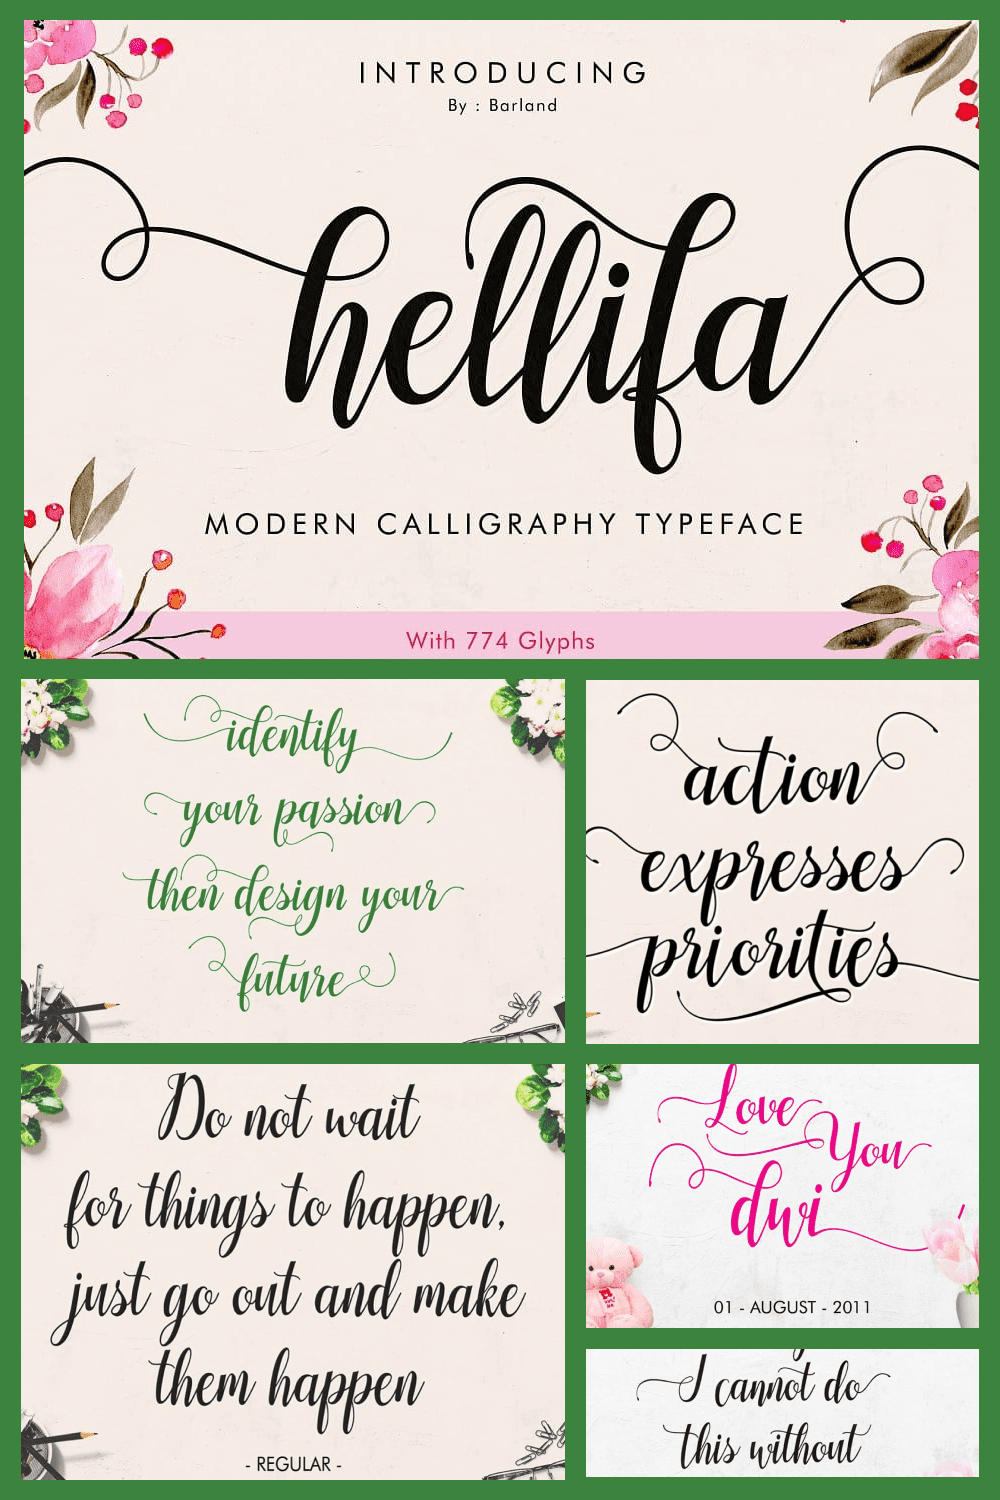 Hellifa Script with a Handmade Calligraphy Style - MasterBundles - Pinterest Collage Image.